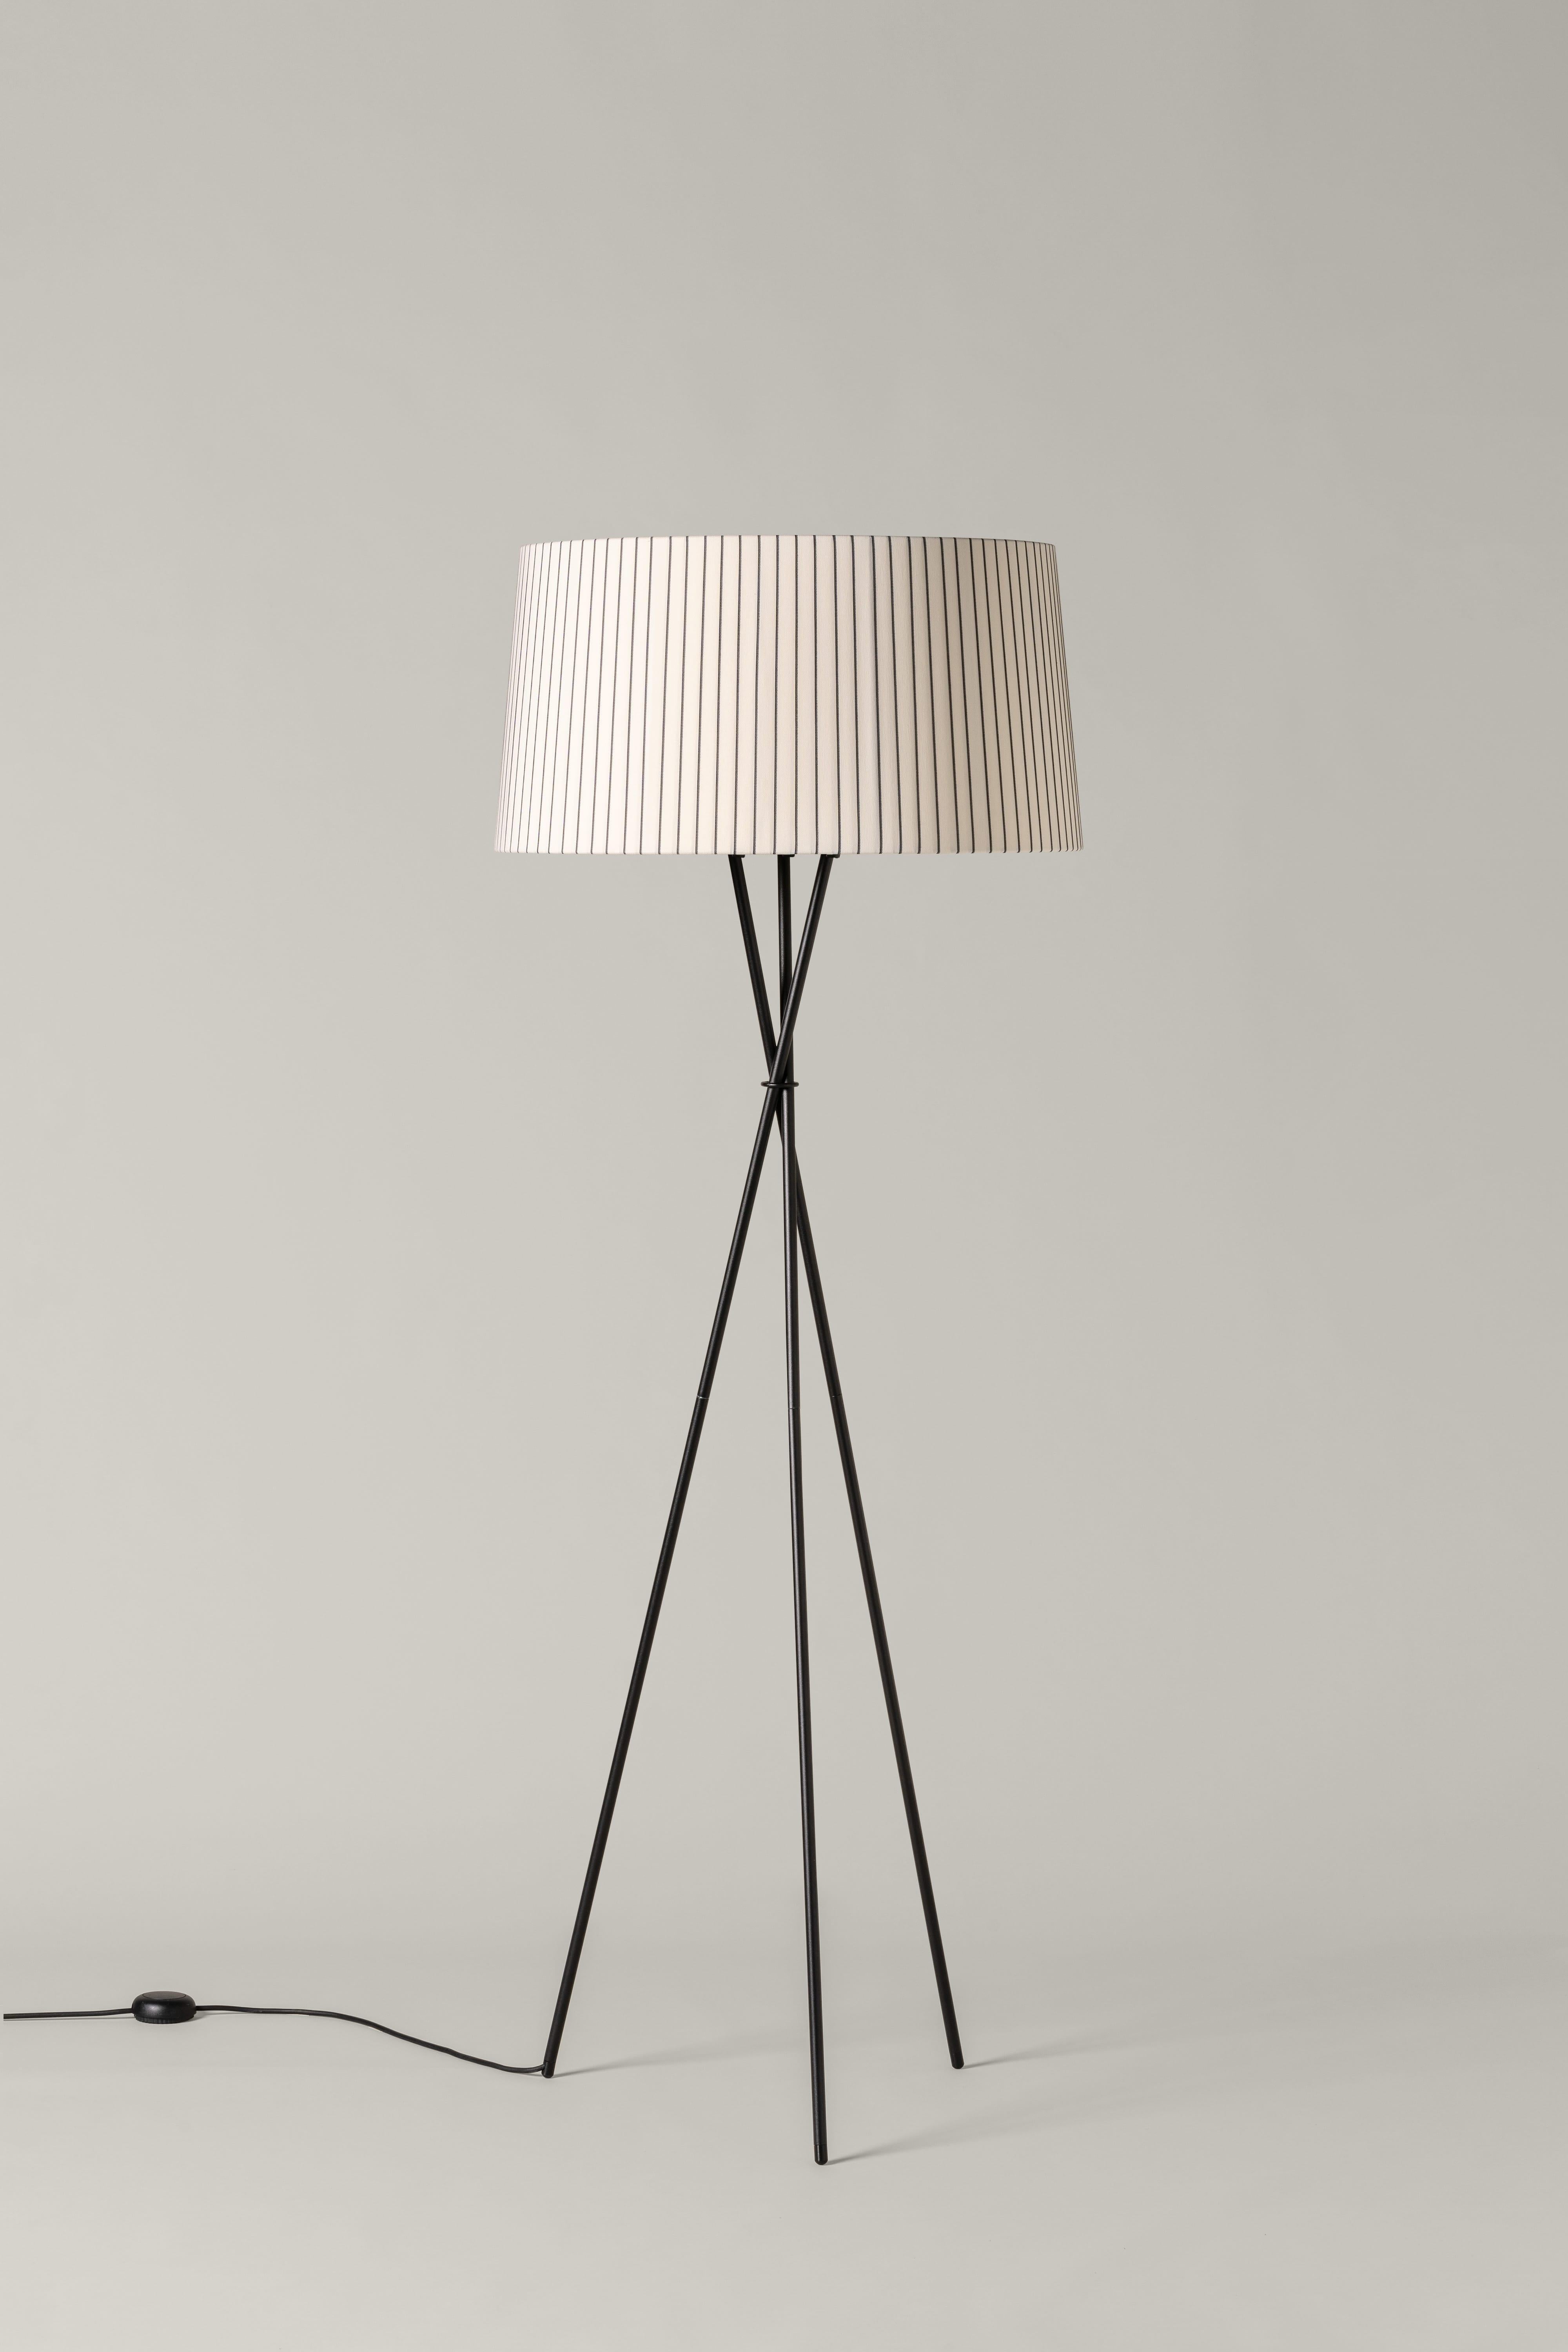 Diplomática Trípode G5 floor lamp by Santa & Cole.
Dimensions: D 62 x H 168 cm.
Materials: Metal, diplomática stripe ribbon lampshade.
Available in other colors.

Trípode humanises neutral spaces with its colourful and functional sobriety. The